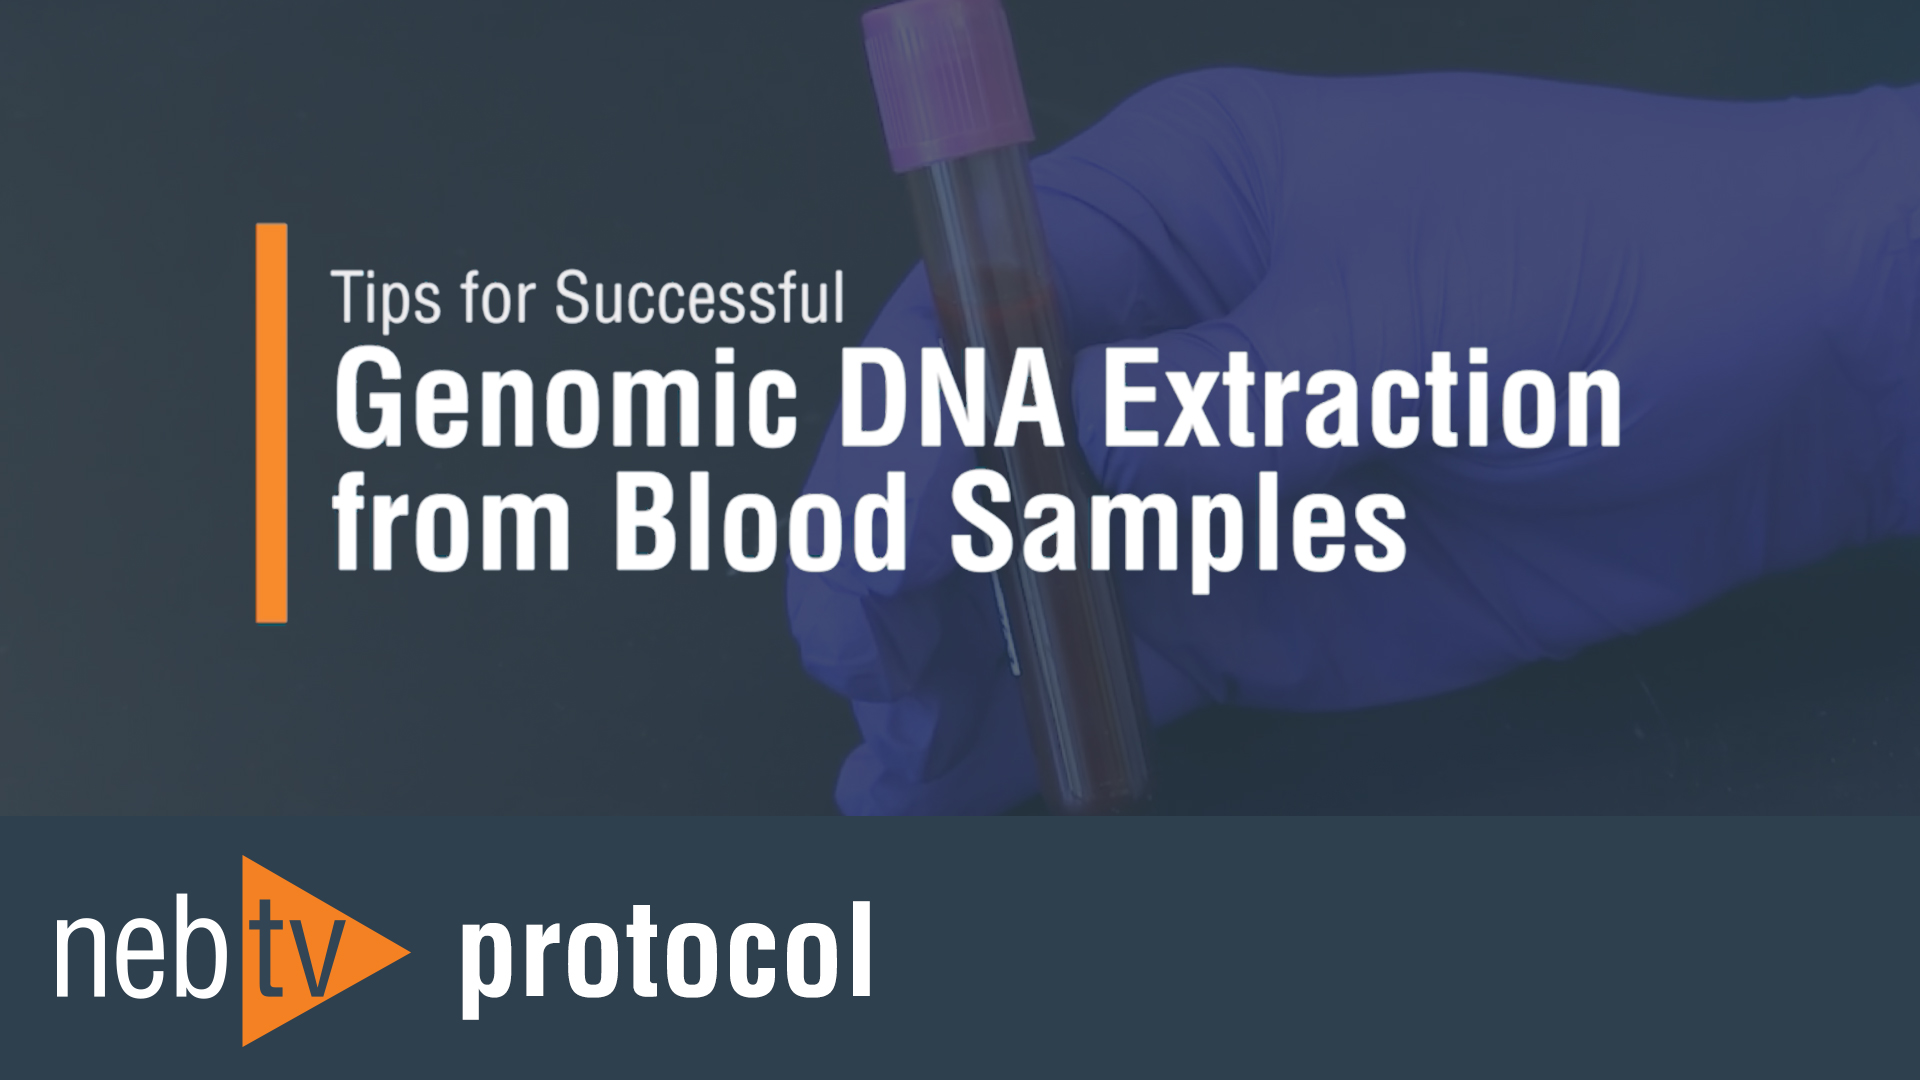 Tips for Successful GenomicDNAExtractionfromBloodSamples